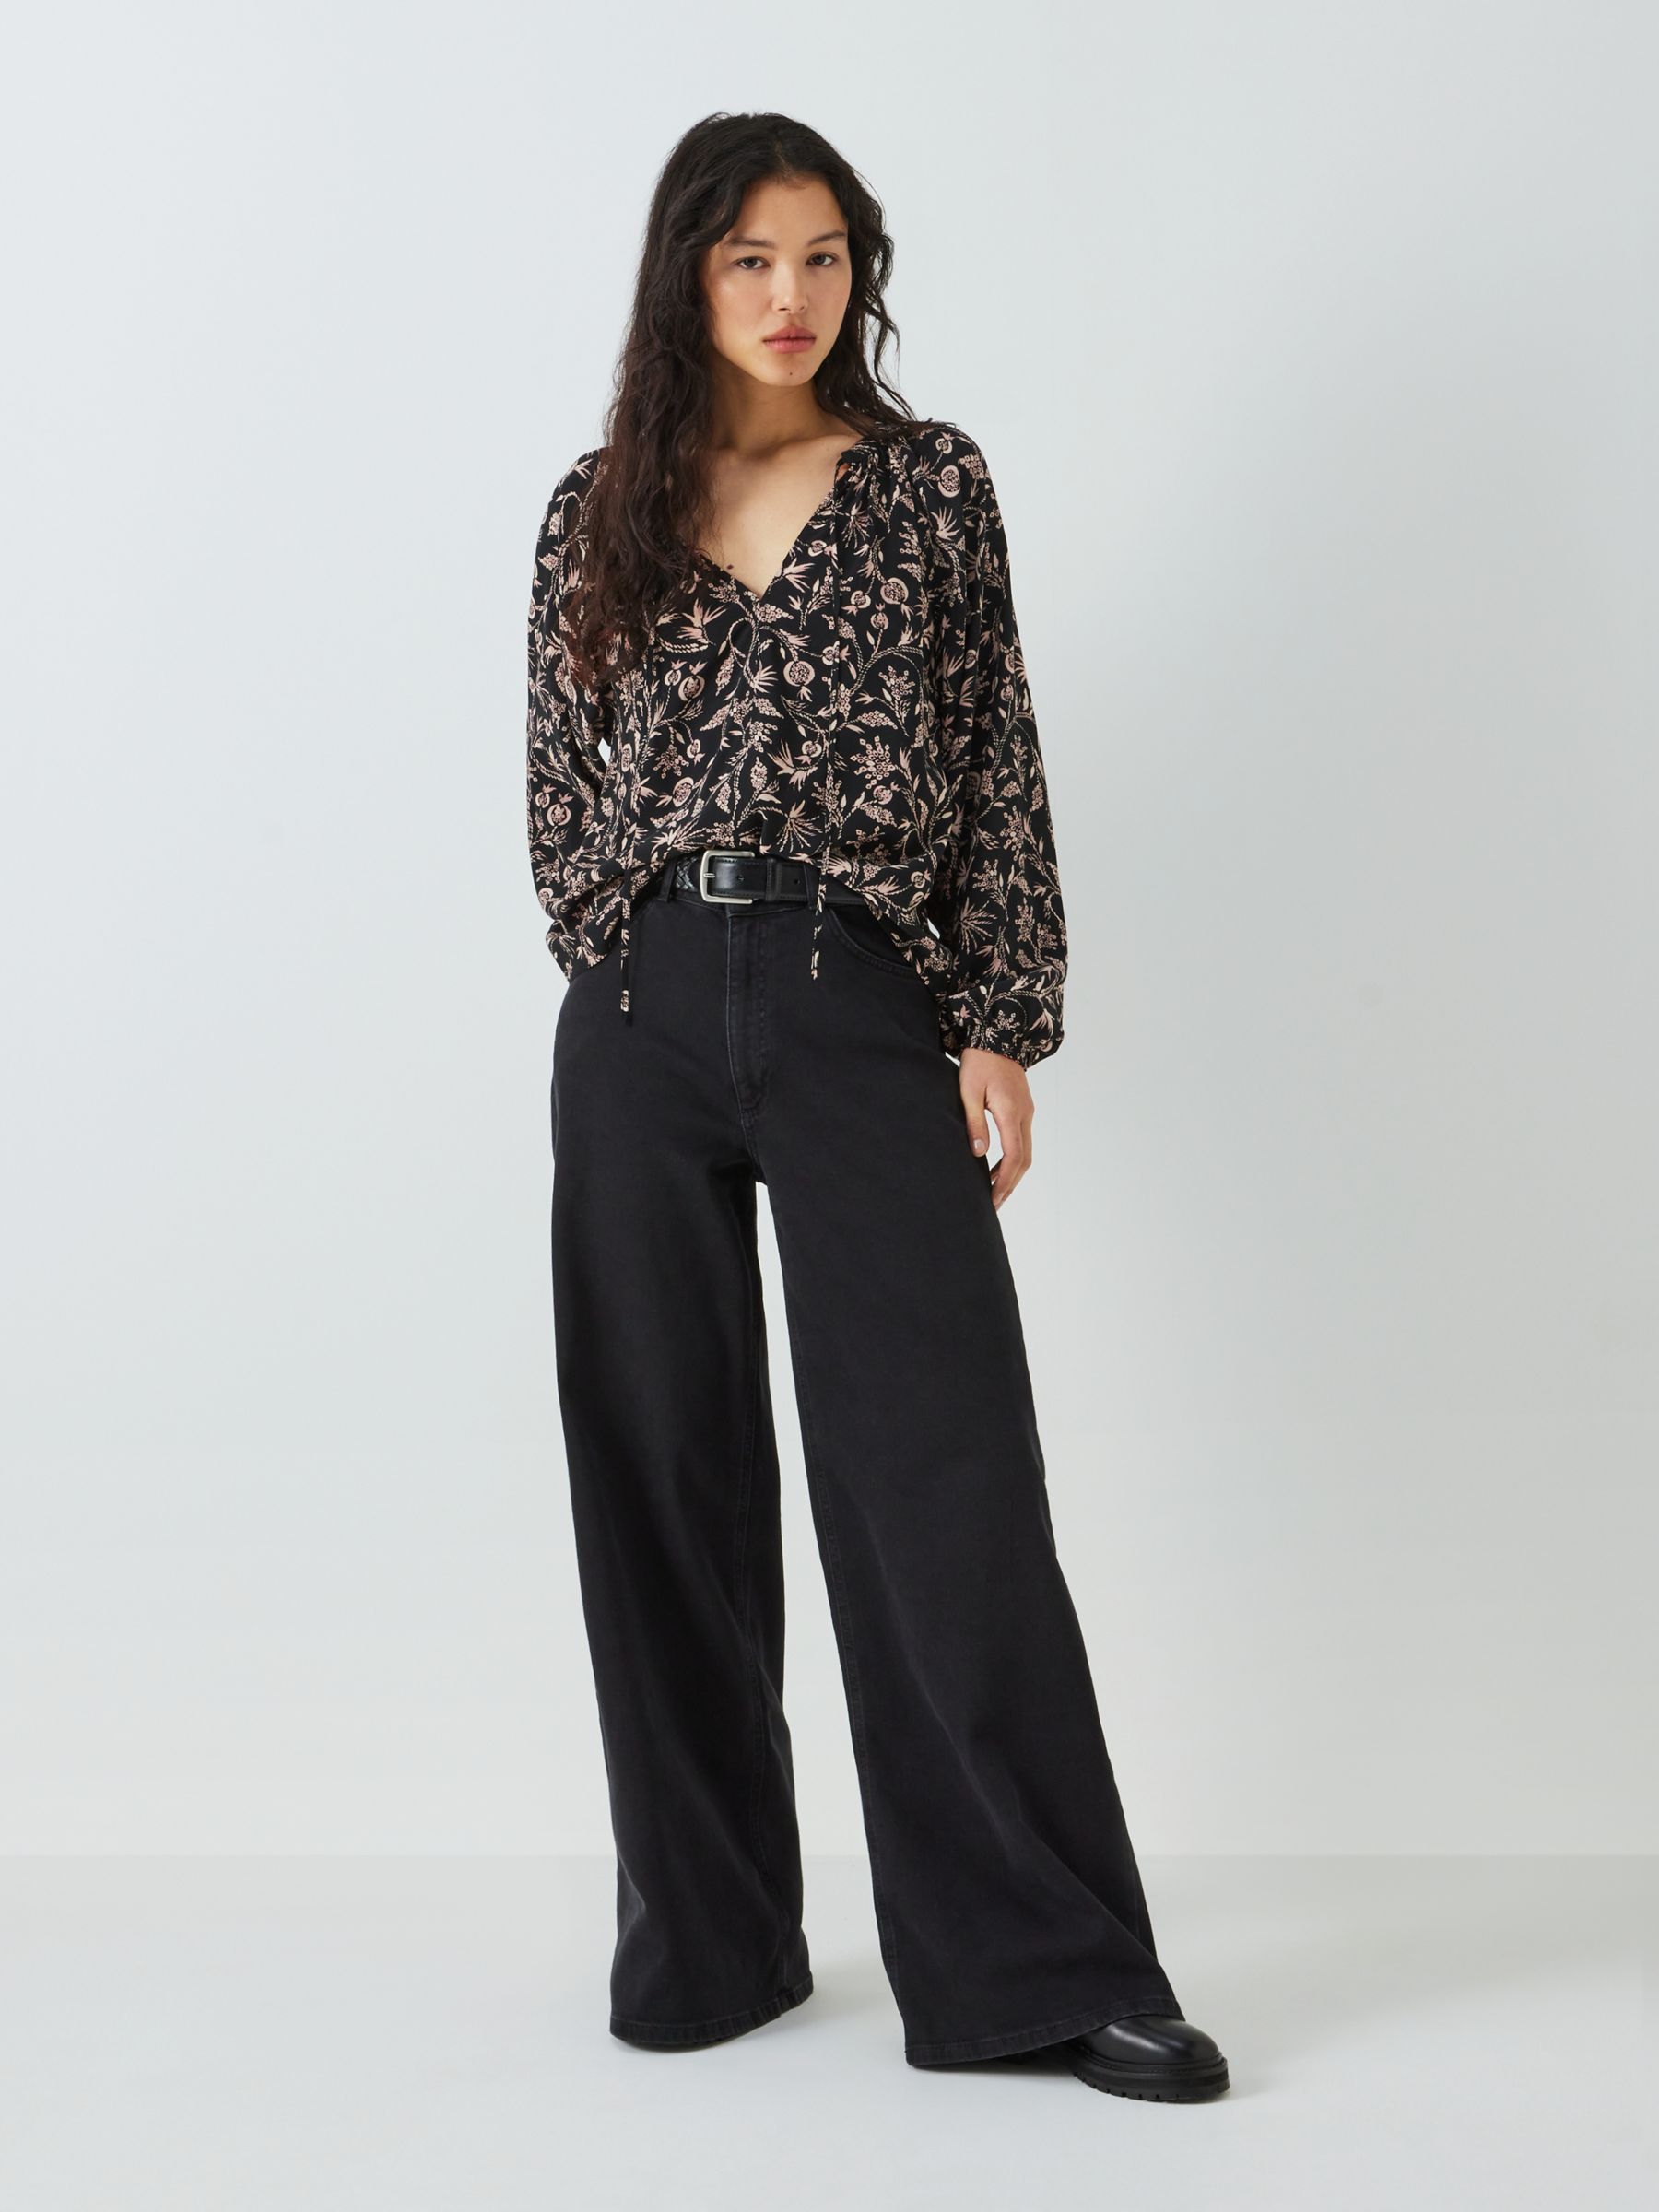 AND/OR Lucinda Floral Blouse, Black/Multi at John Lewis & Partners